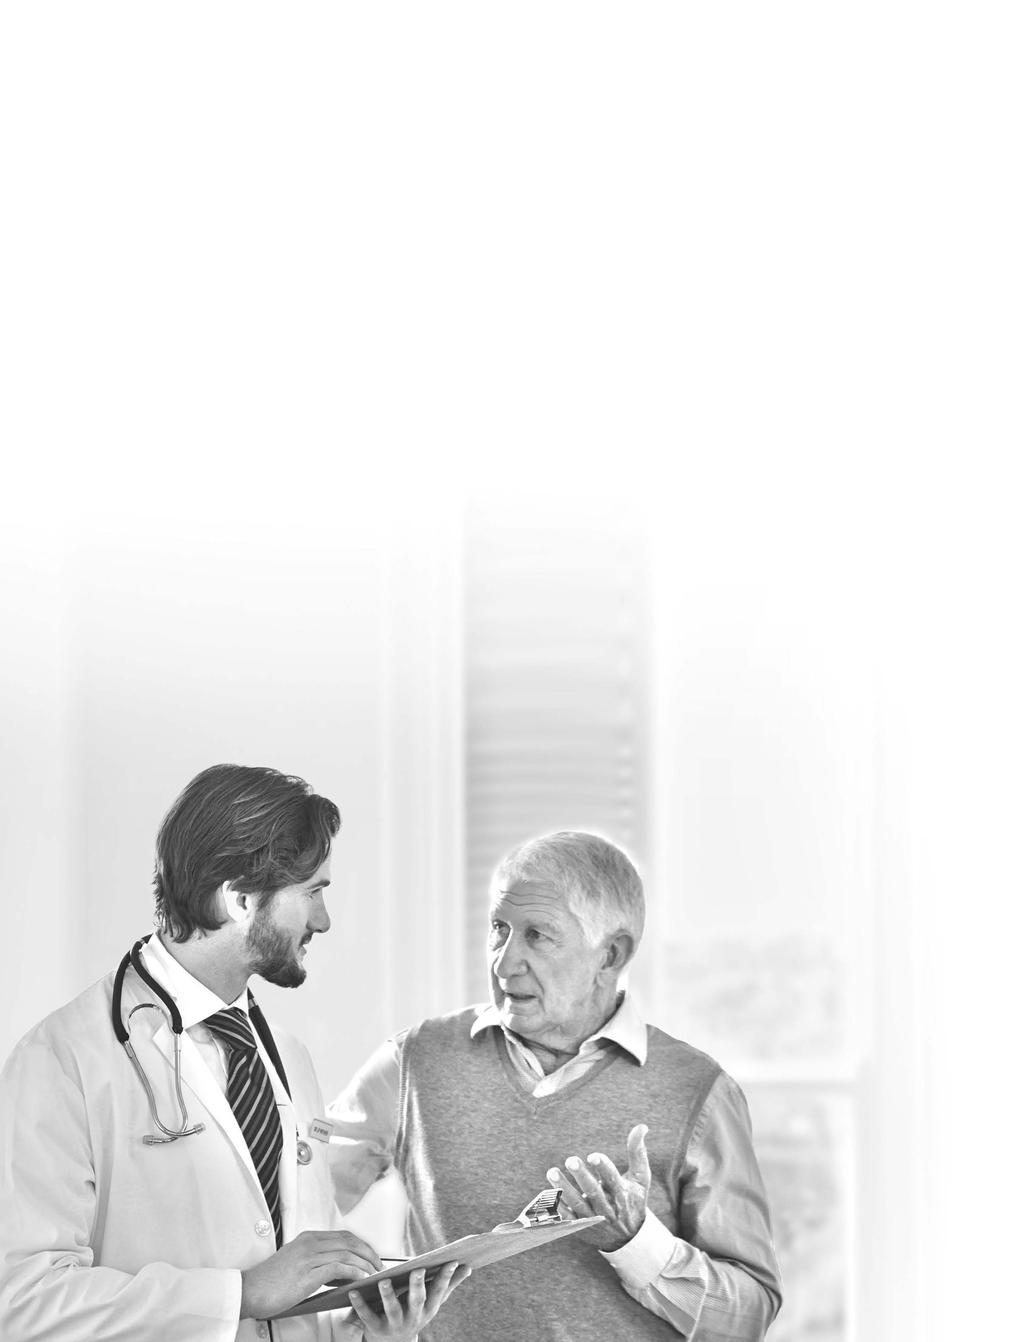 QUESTIONS TO ASK YOUR DOCTOR It is important to communicate regularly with your health care provider so informed decisions can be made regarding your treatment.